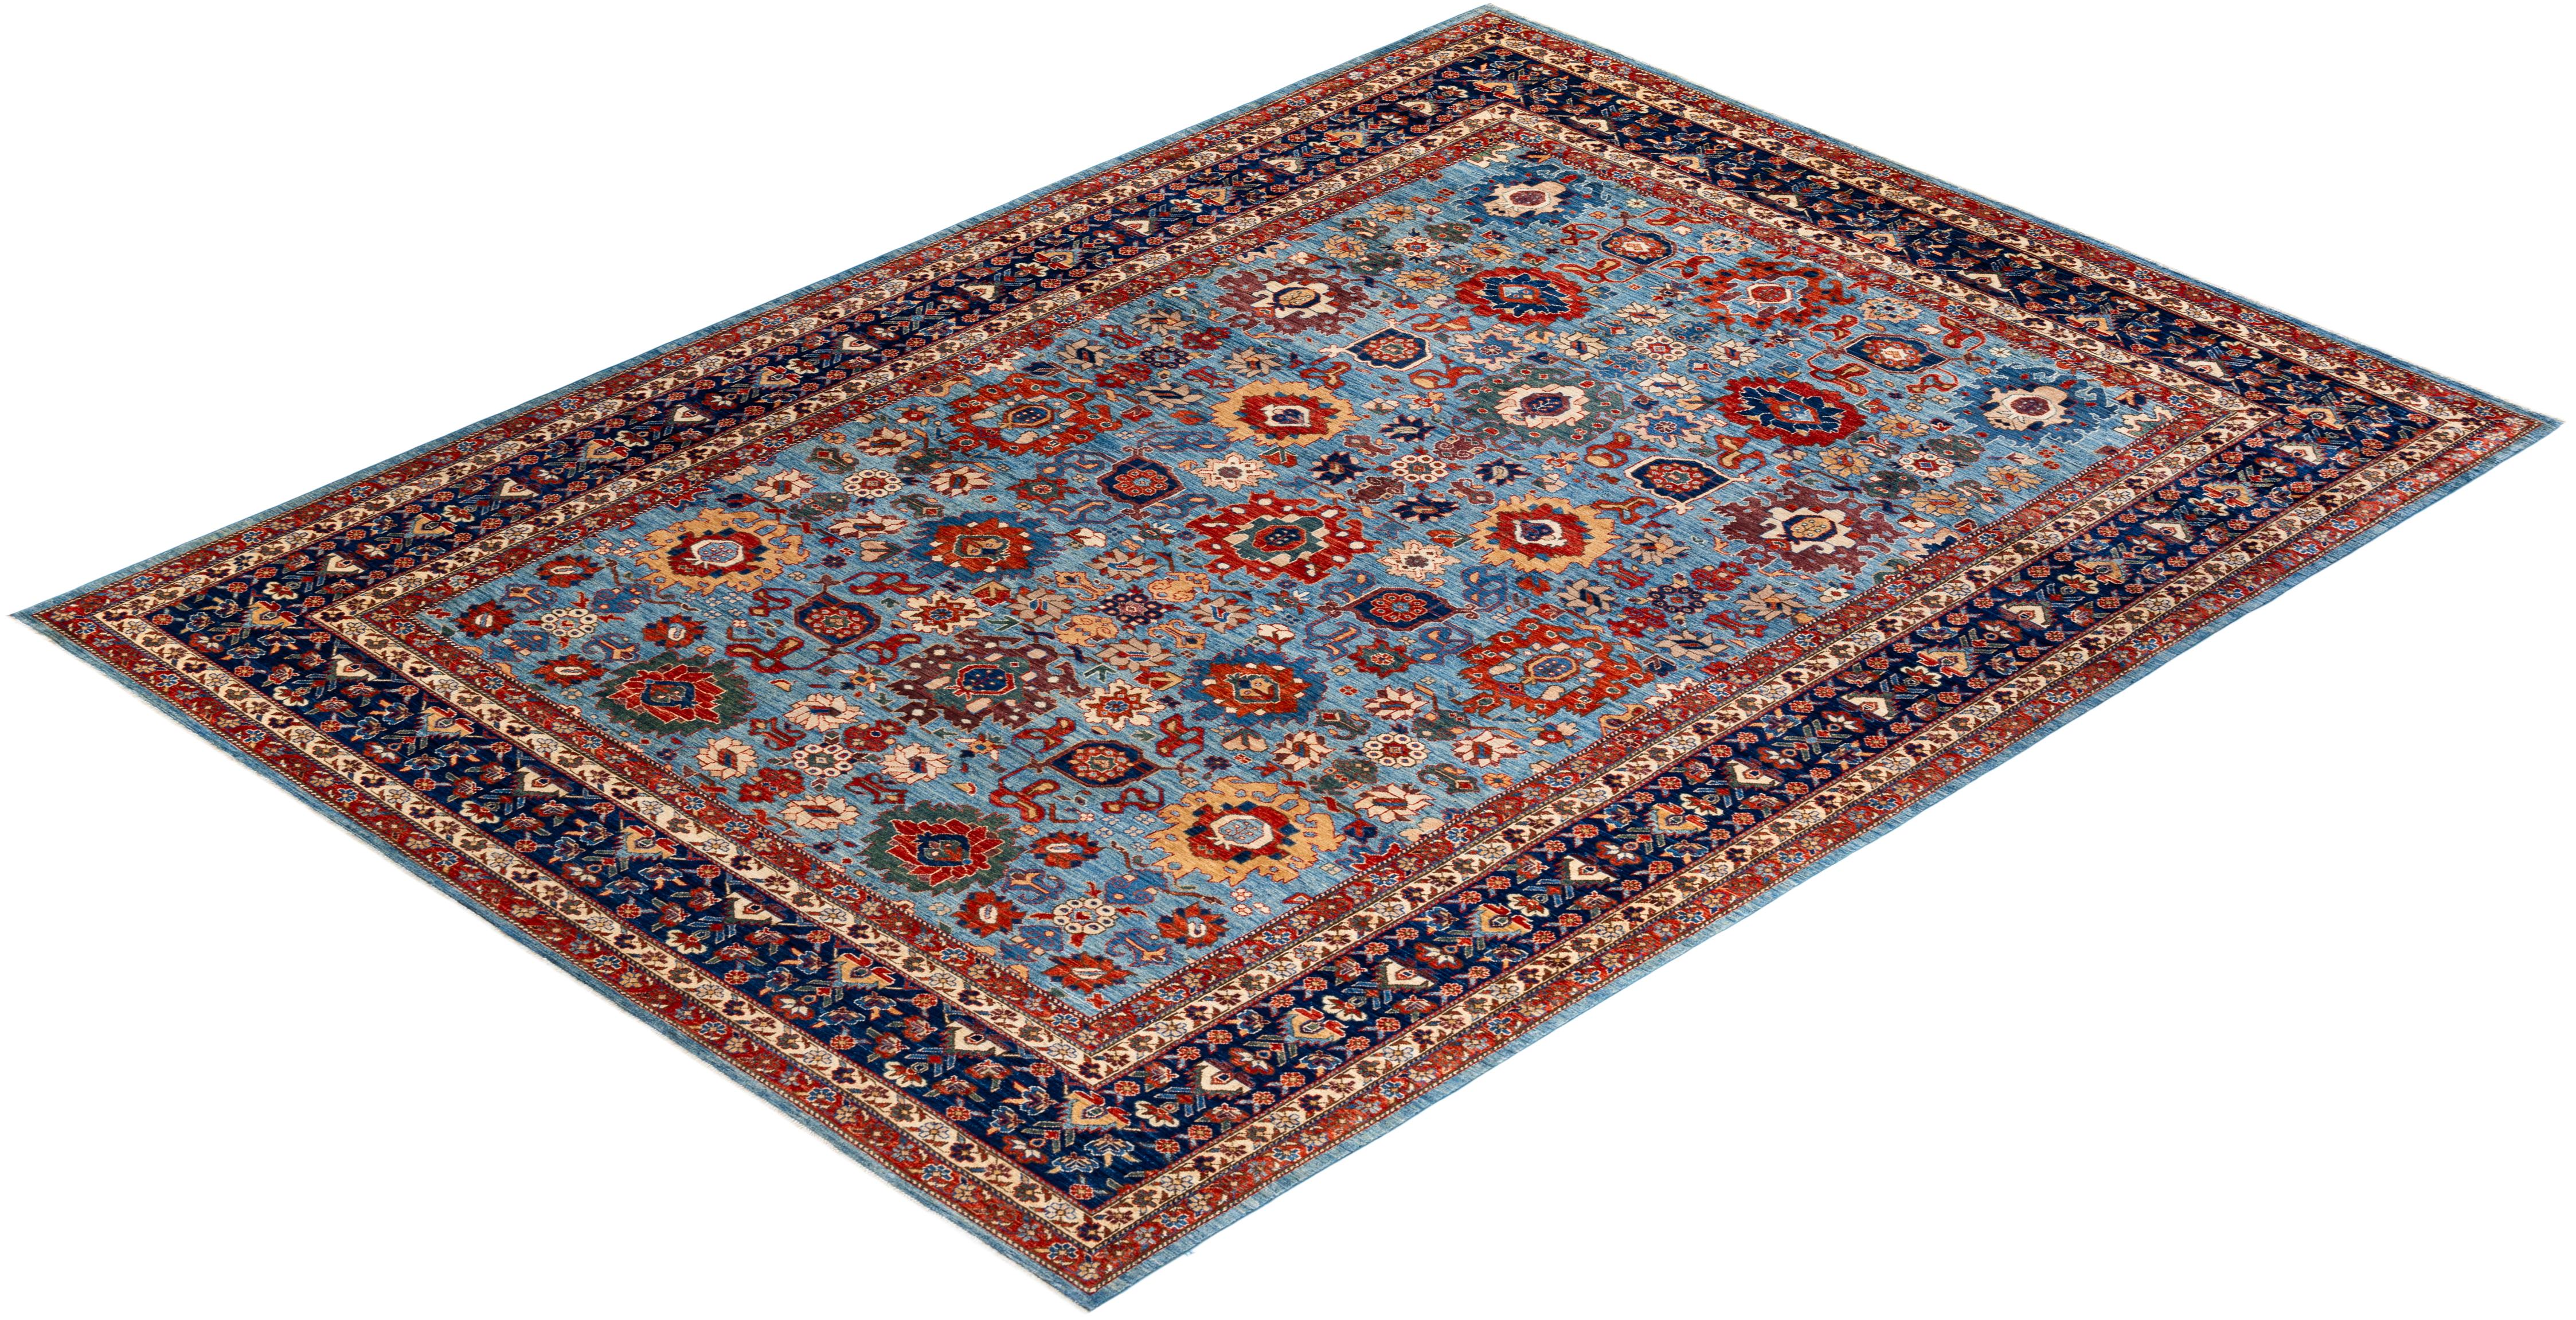 Serapi, One-of-a-Kind Hand-Knotted Runner Rug, Light Blue In New Condition For Sale In Norwalk, CT